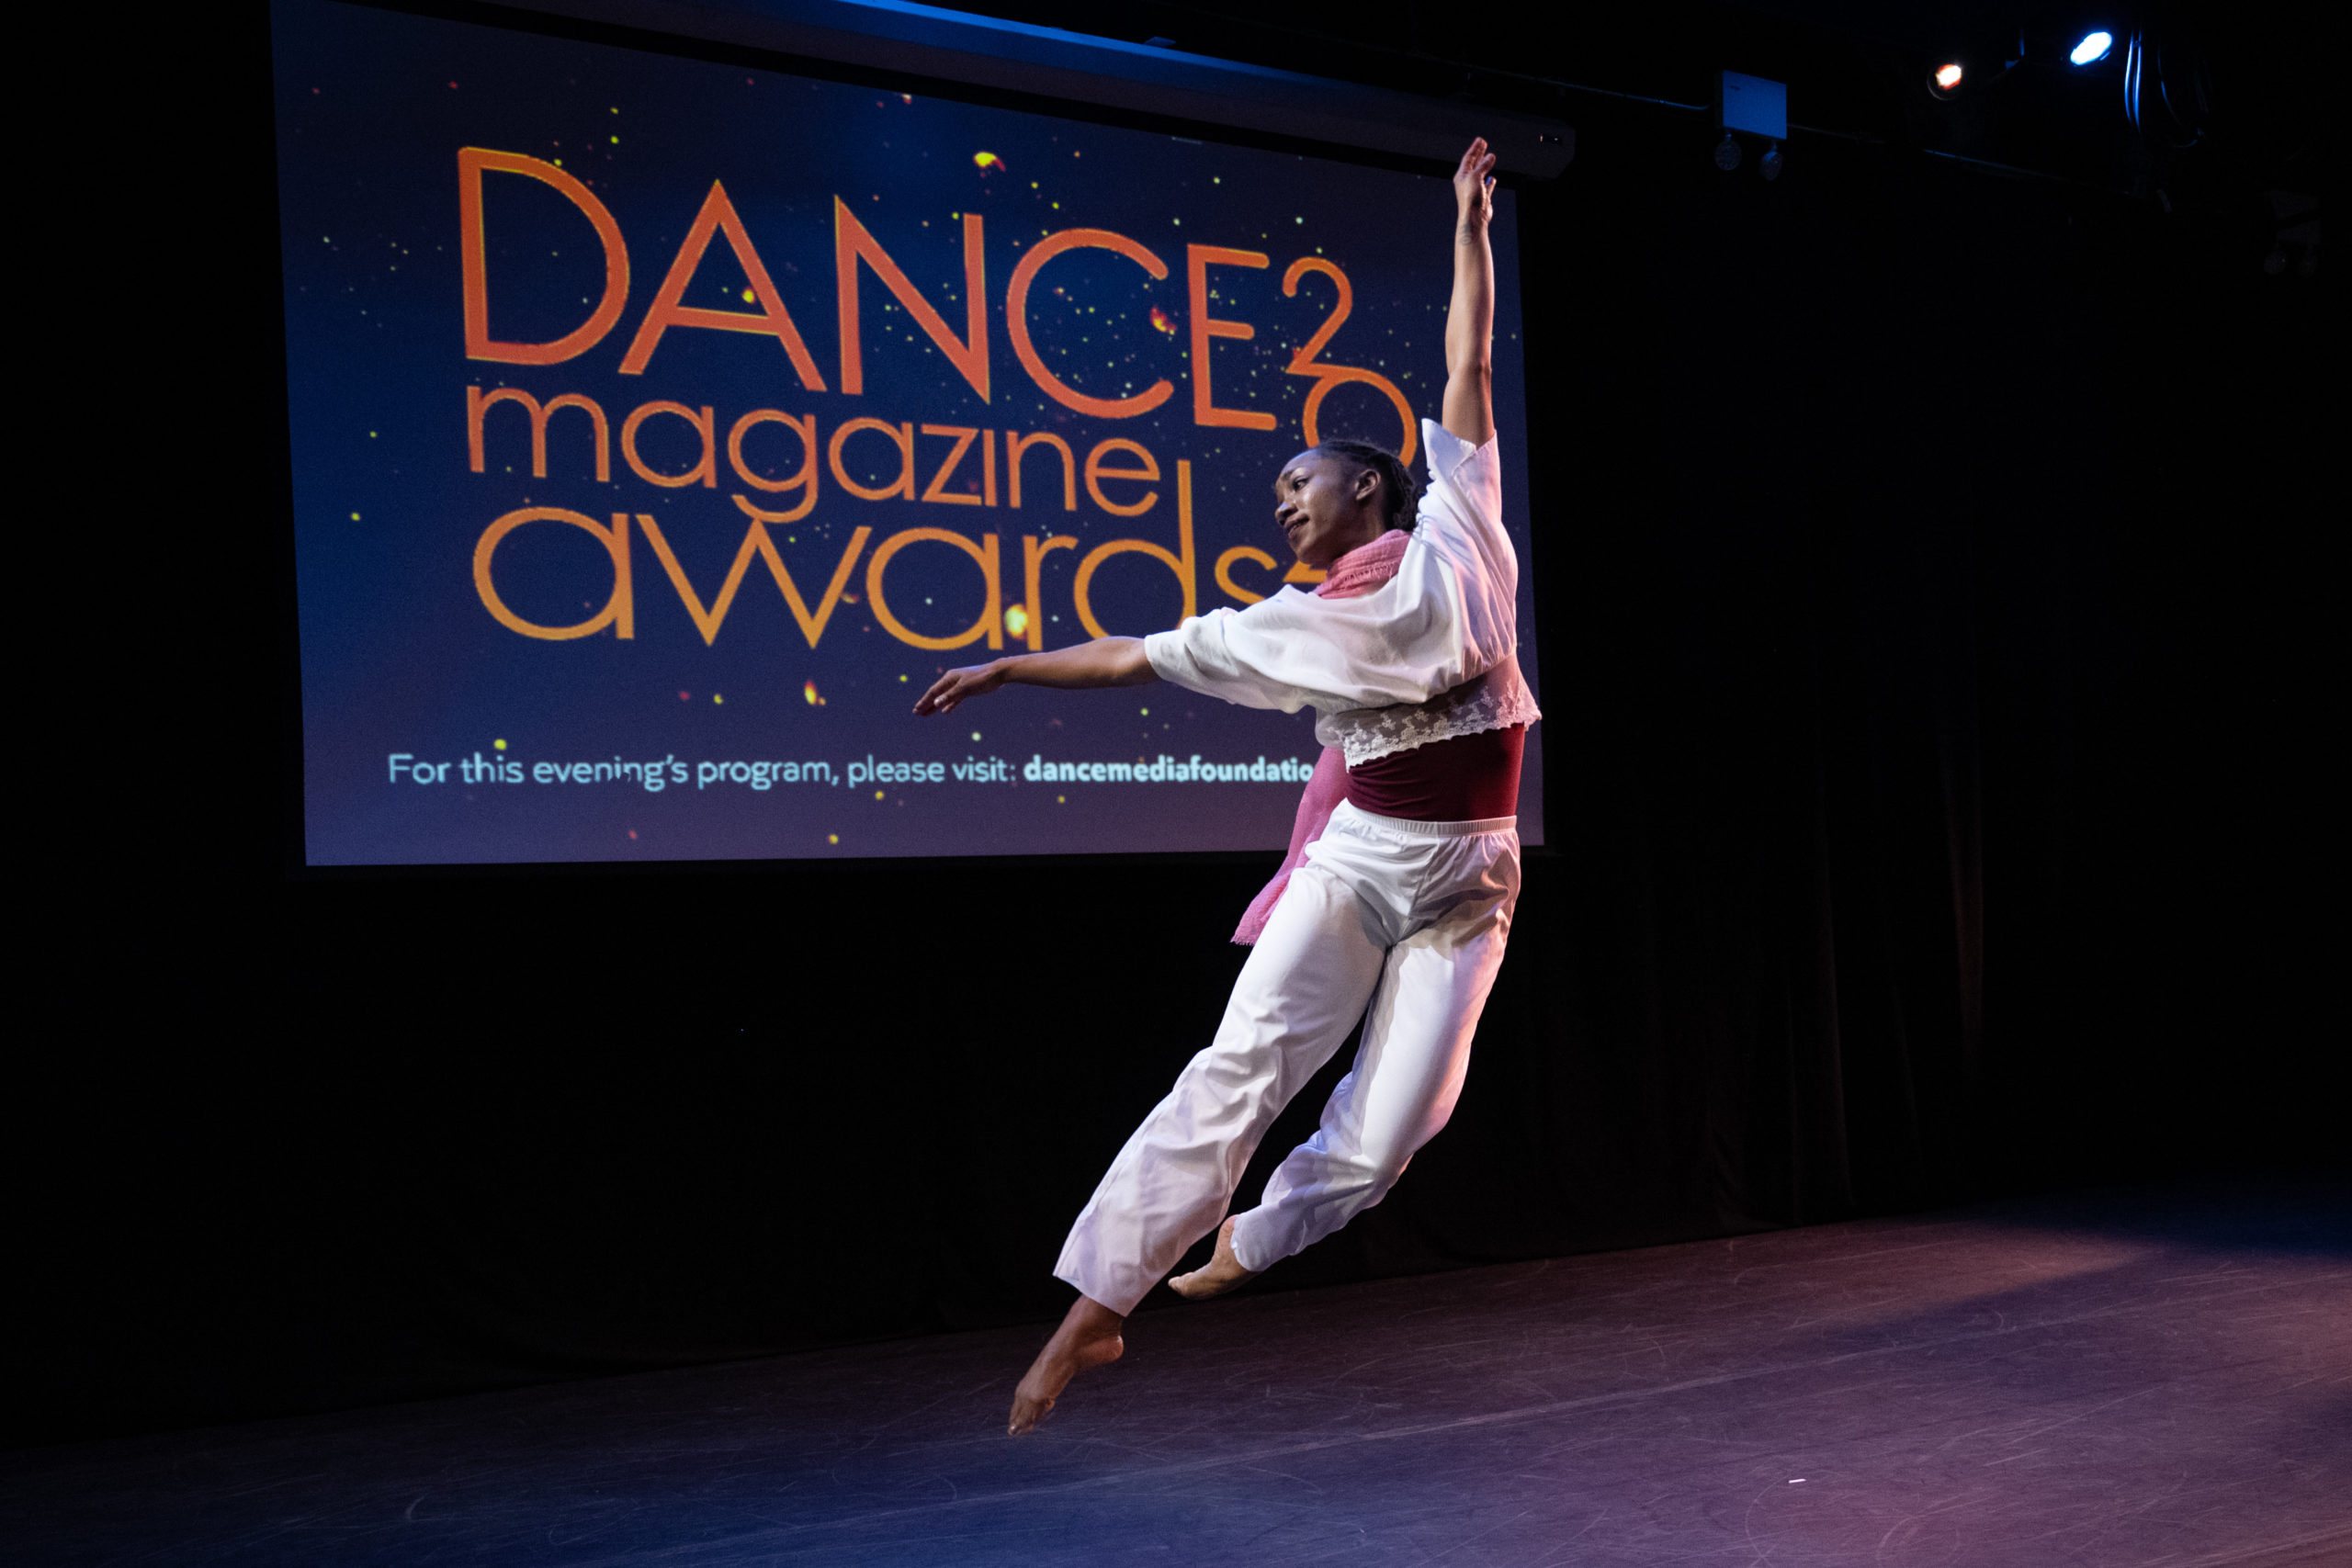 A Black dancer in flowing white pants and a half-sleeved crop top is caught midair in a petite jeté, looking over her side-extended arm in profile. In the background, a projection screen shows the logo for the 2022 Dance Magazine Awards.